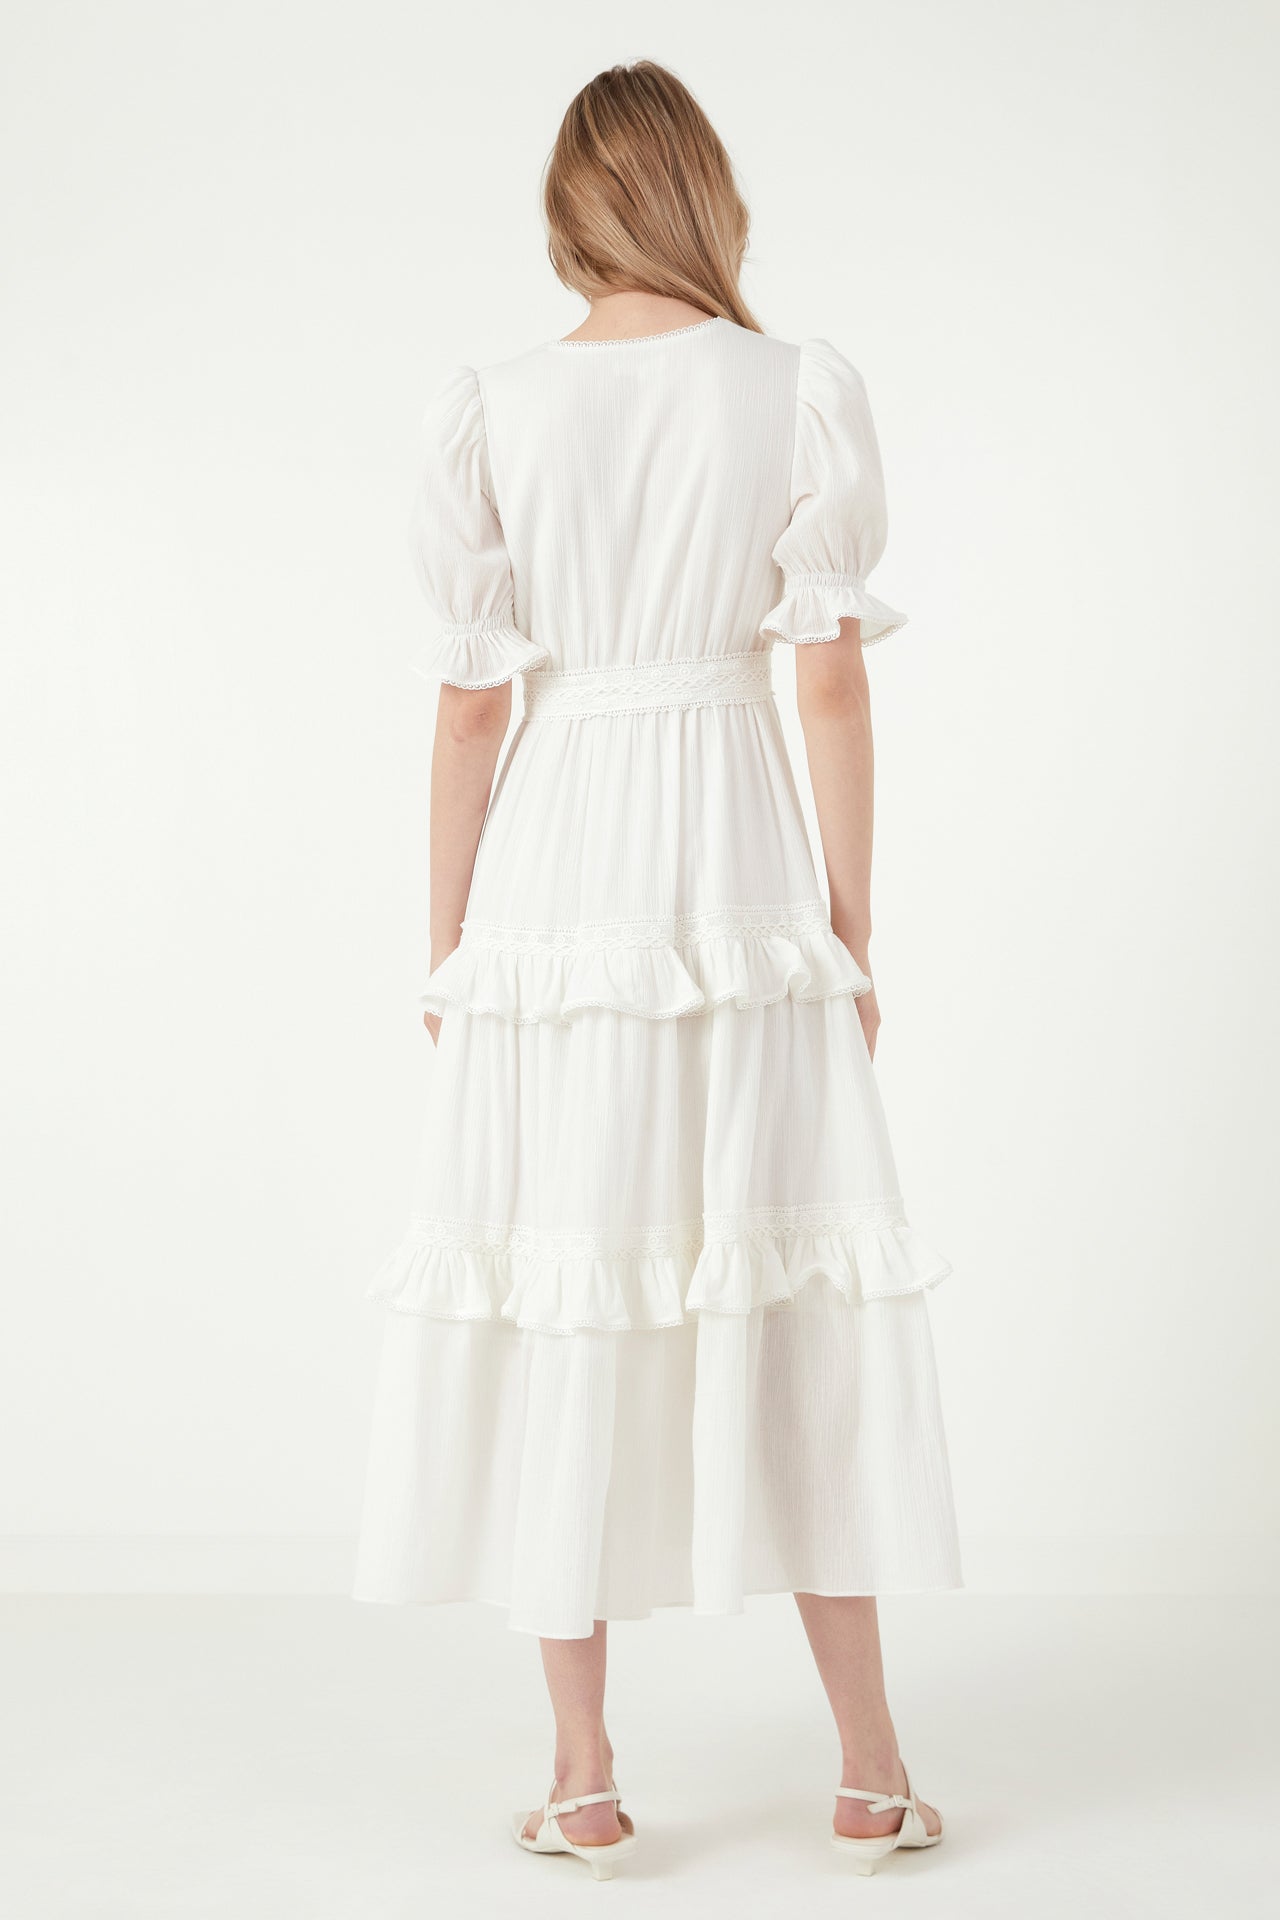 FREE THE ROSES - Ruffled Lace Trim Duster Maxi - DRESSES available at Objectrare